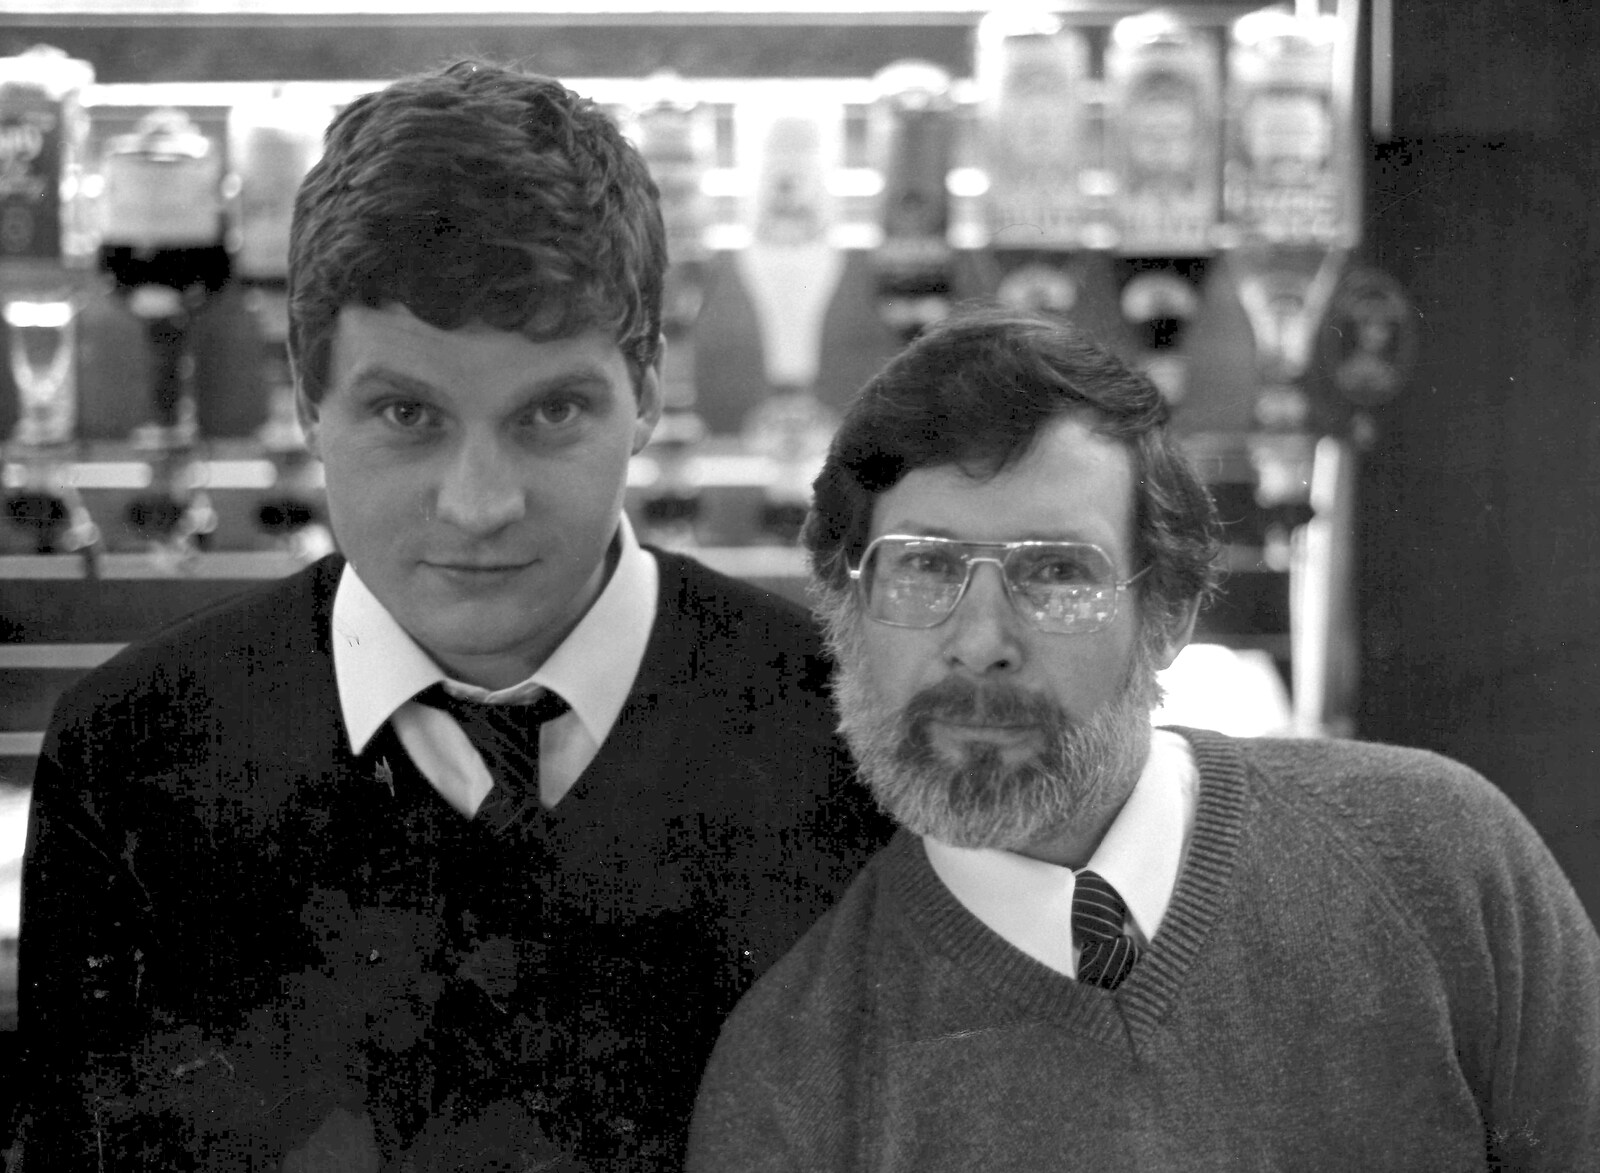 Steve and Brian on the PPSU main bar from A Walk to Sheepstor, and Buckfast Abbey - Meavy and Buckfastleight - 1st May 1989